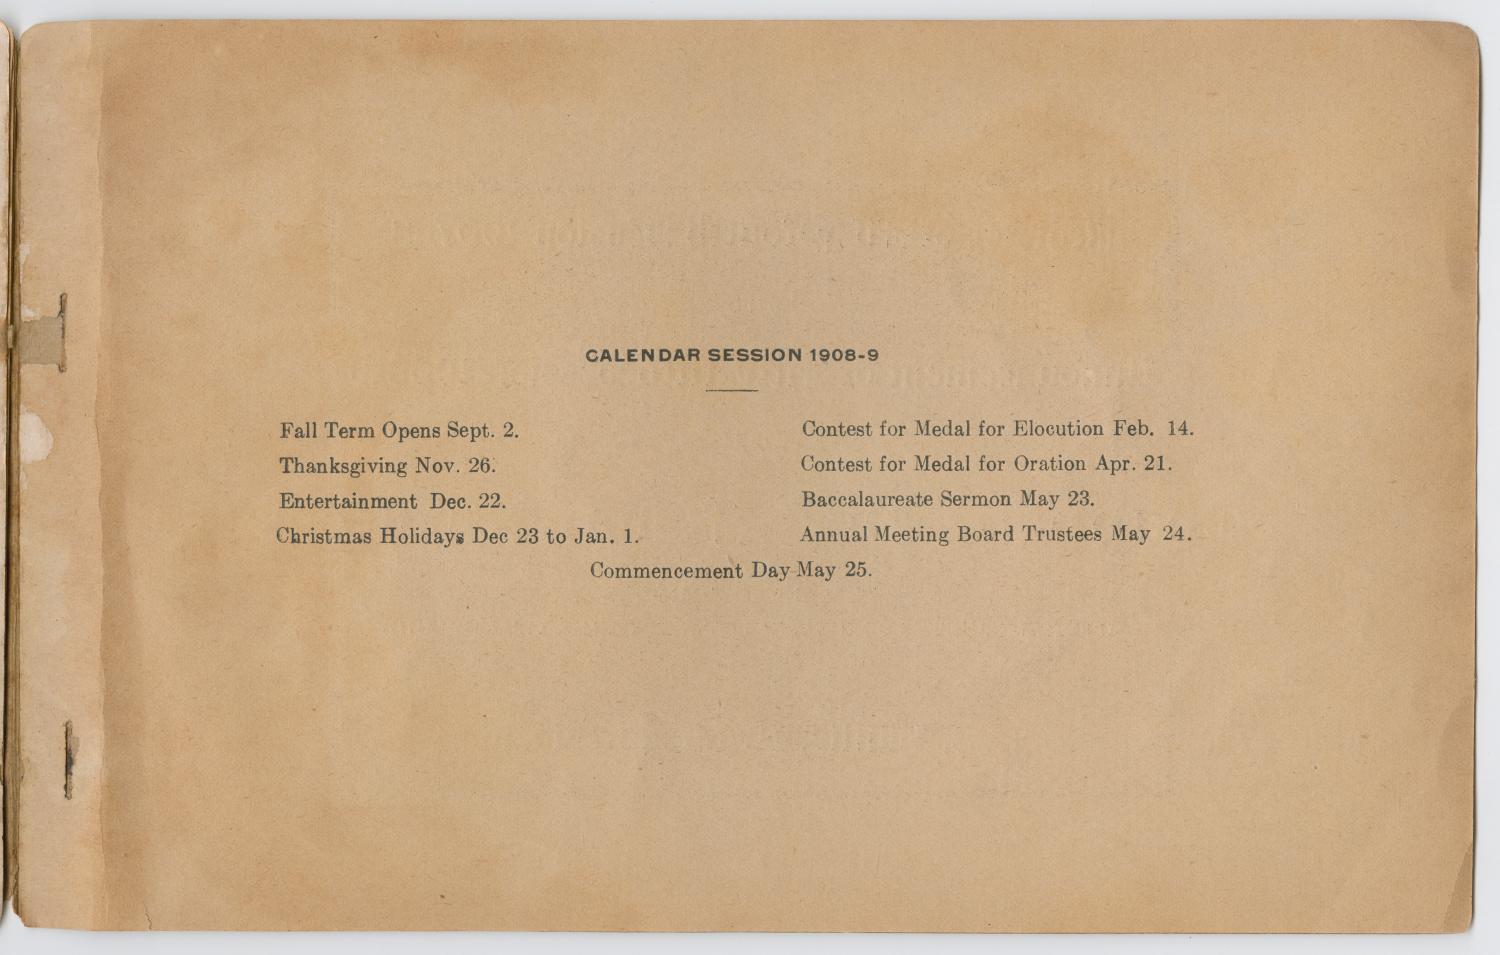 Catalog of Chappell Hill Female College, 1908
                                                
                                                    2
                                                